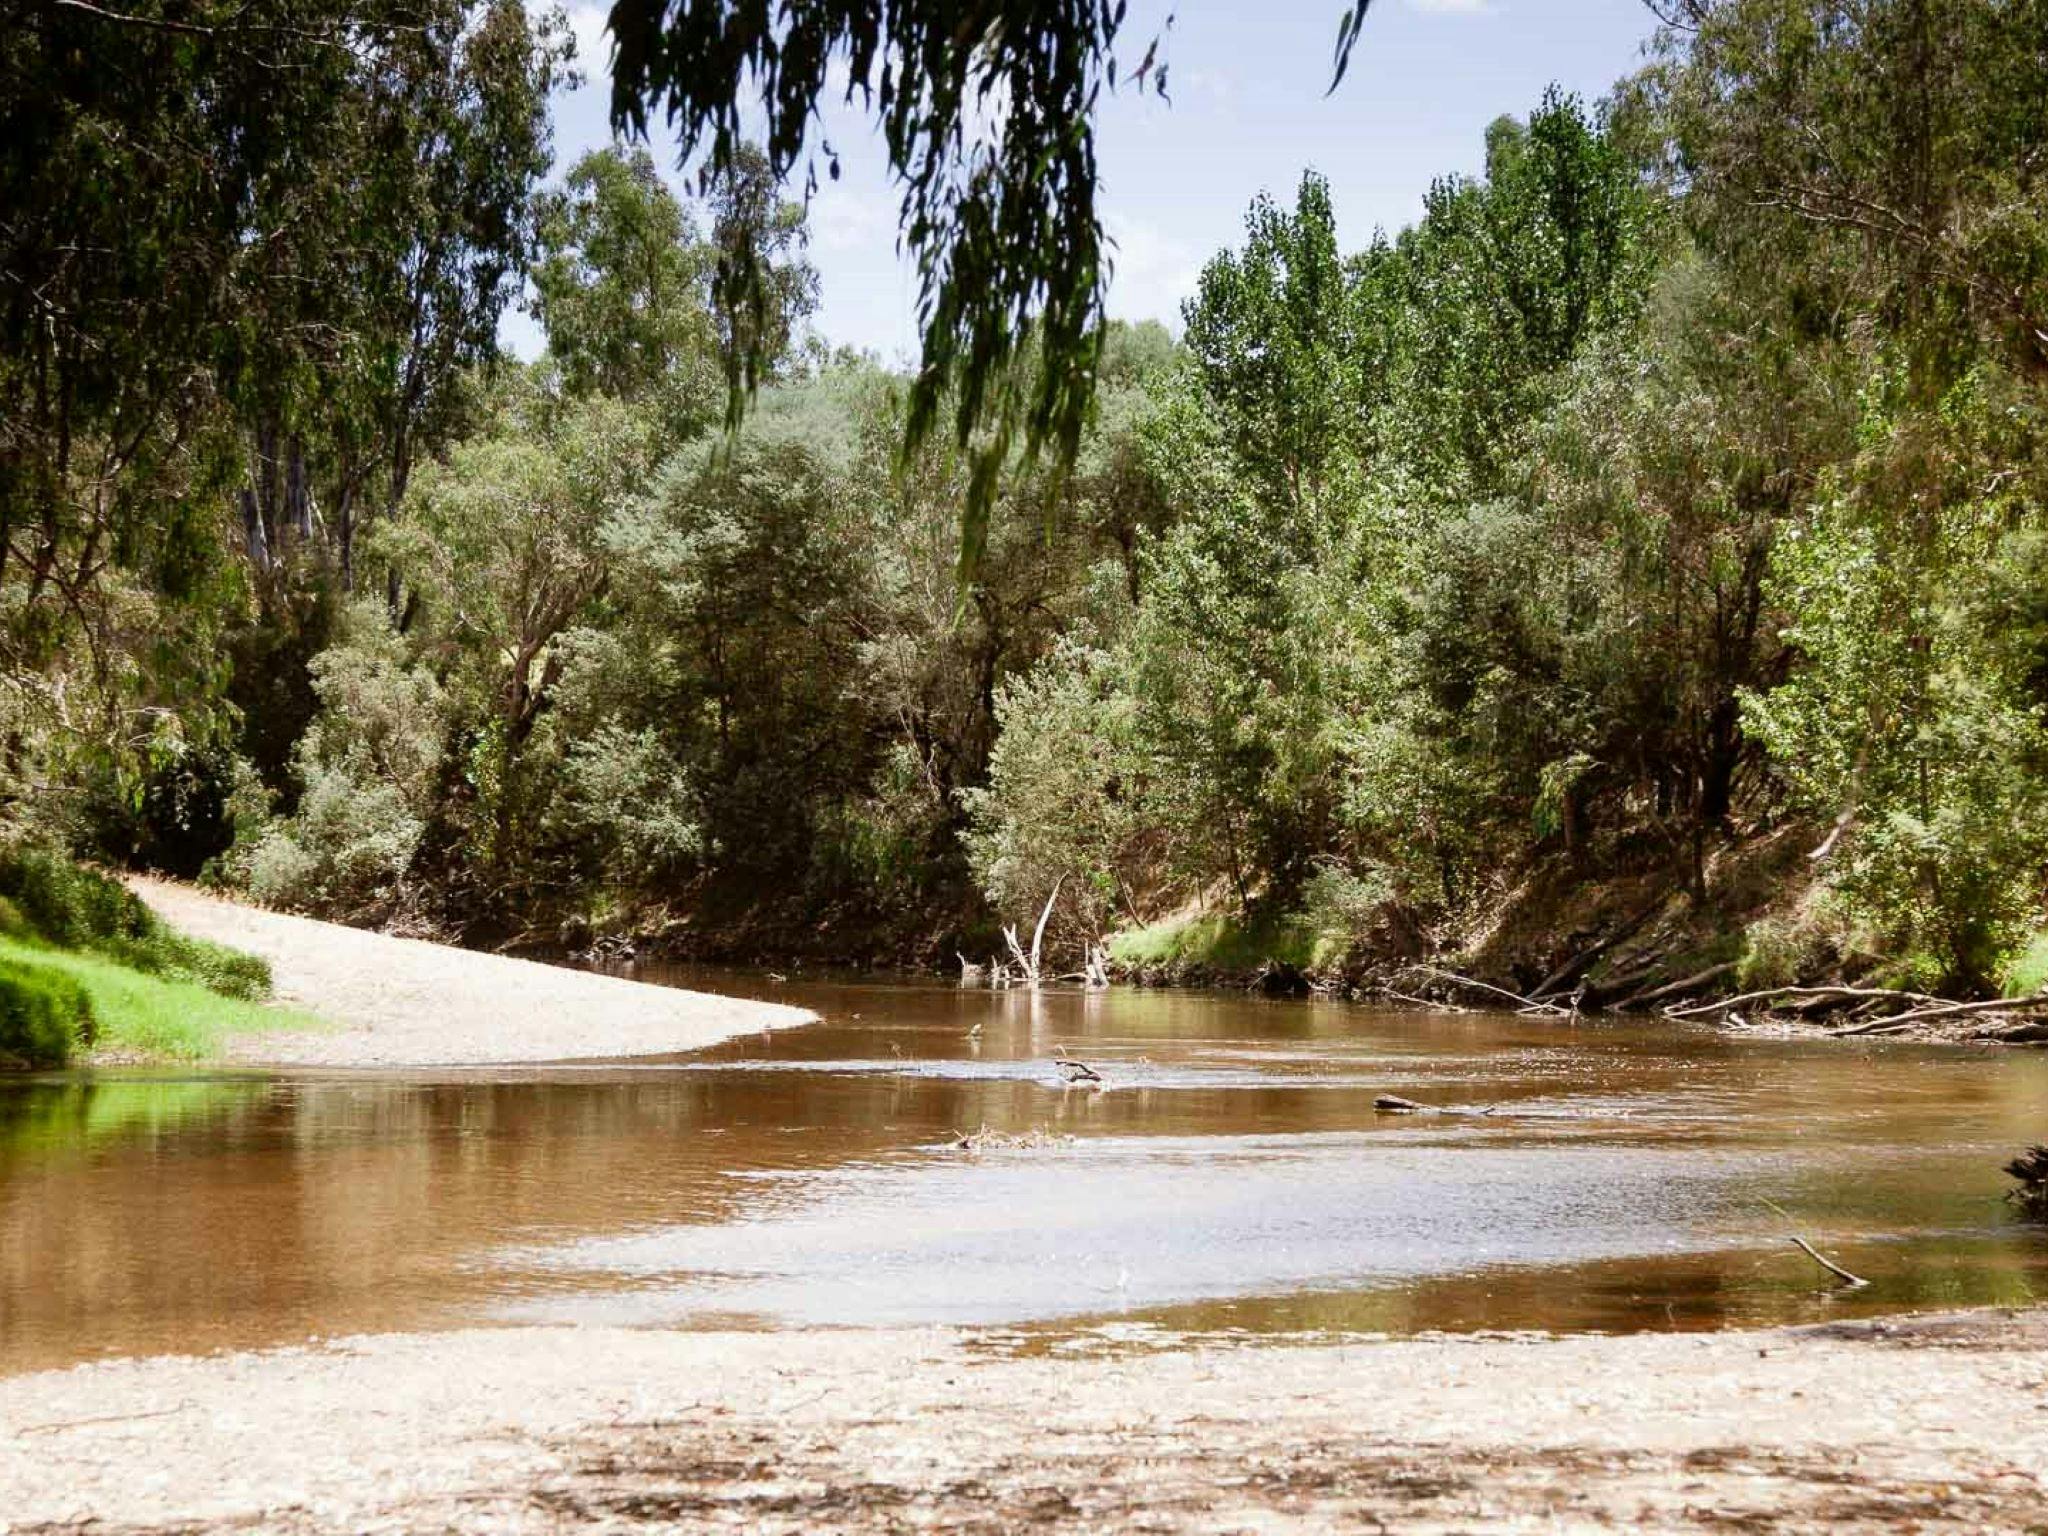 The Ovens River provides for a private and tranquil guest experience in the summer months